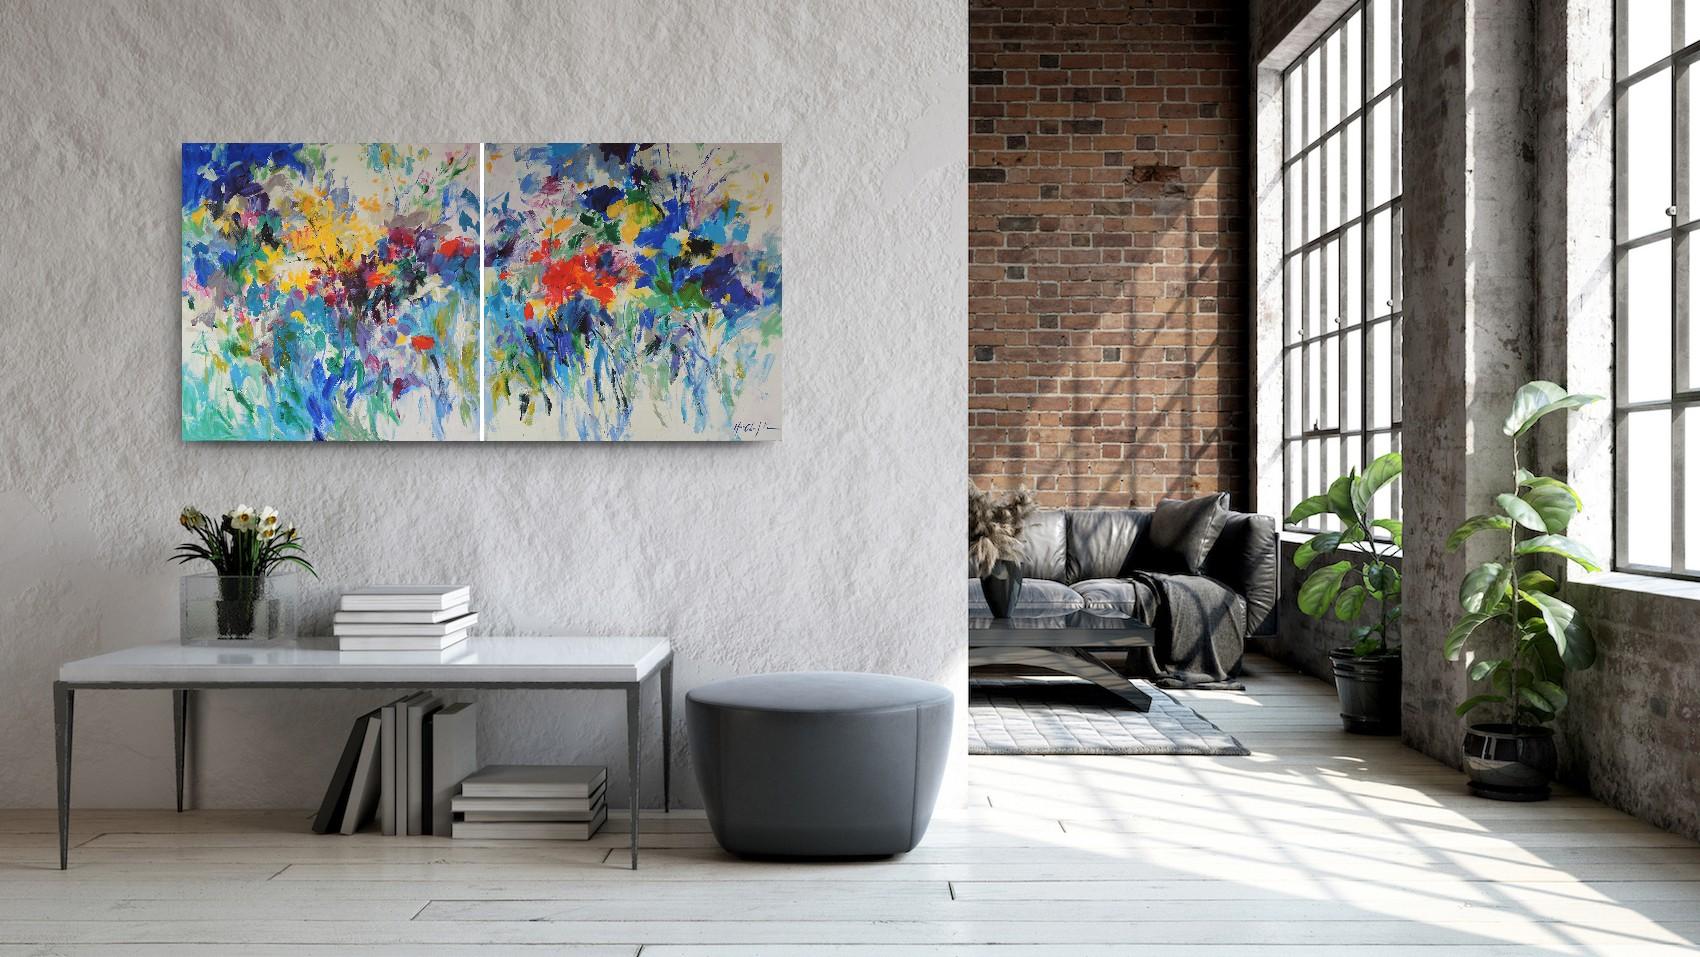 Summer feeling in blue, floral diptych - Gray Landscape Painting by Mary Chaplin